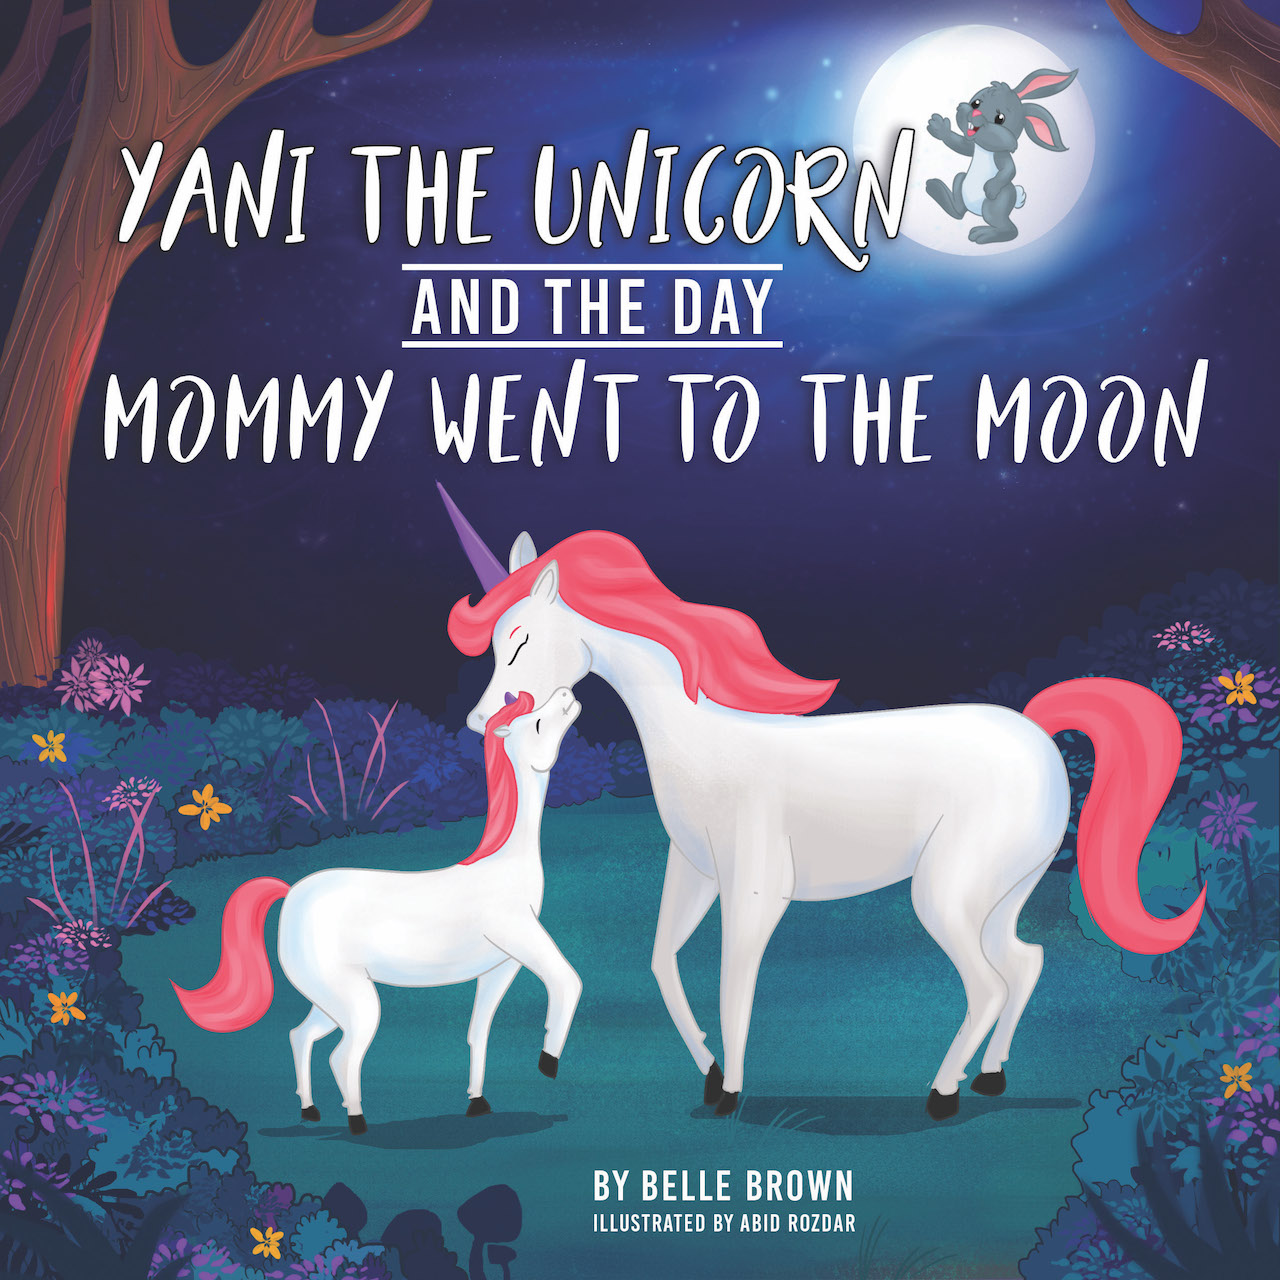 FREE: Yani The Unicorn And The Day Mommy Went To The Moon by Belle Brown